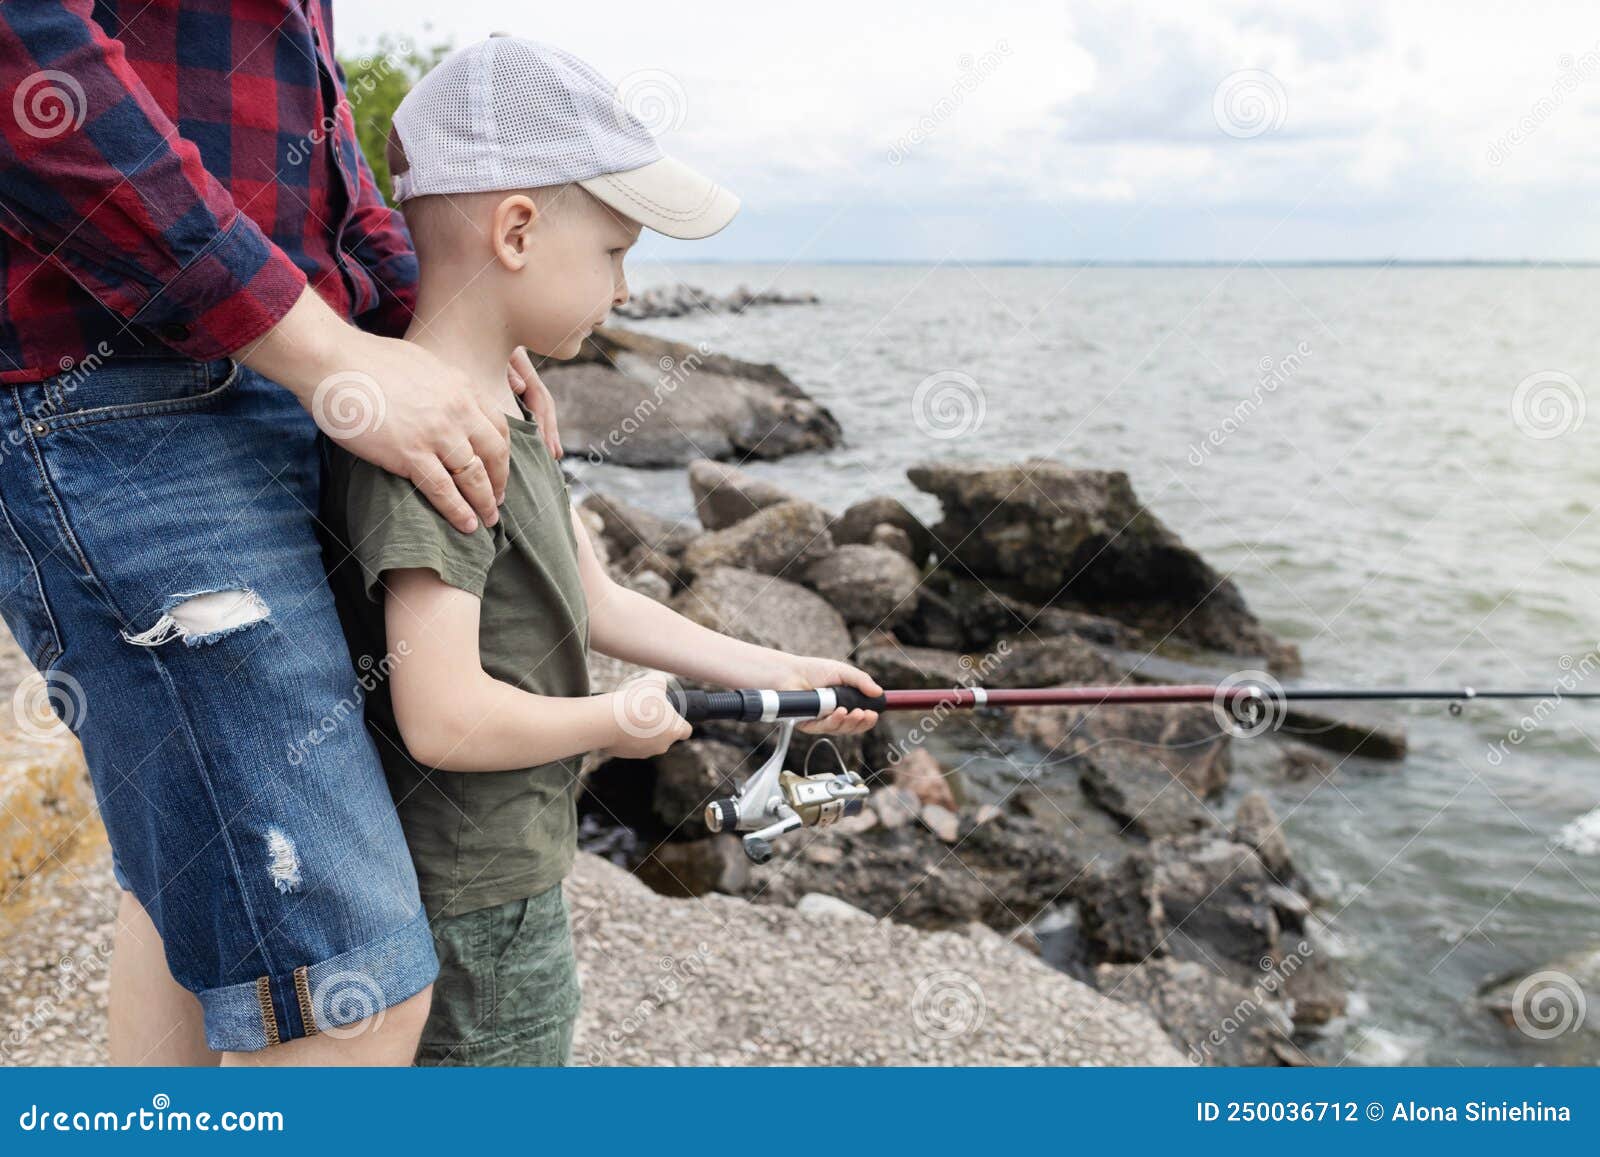 Father and Son Fishing. Dad Shows His Son How To Hold the Spinning and Spin  the Reel. Fishing Training on a Pond or River. Caring Stock Photo - Image  of lifestyle, pond